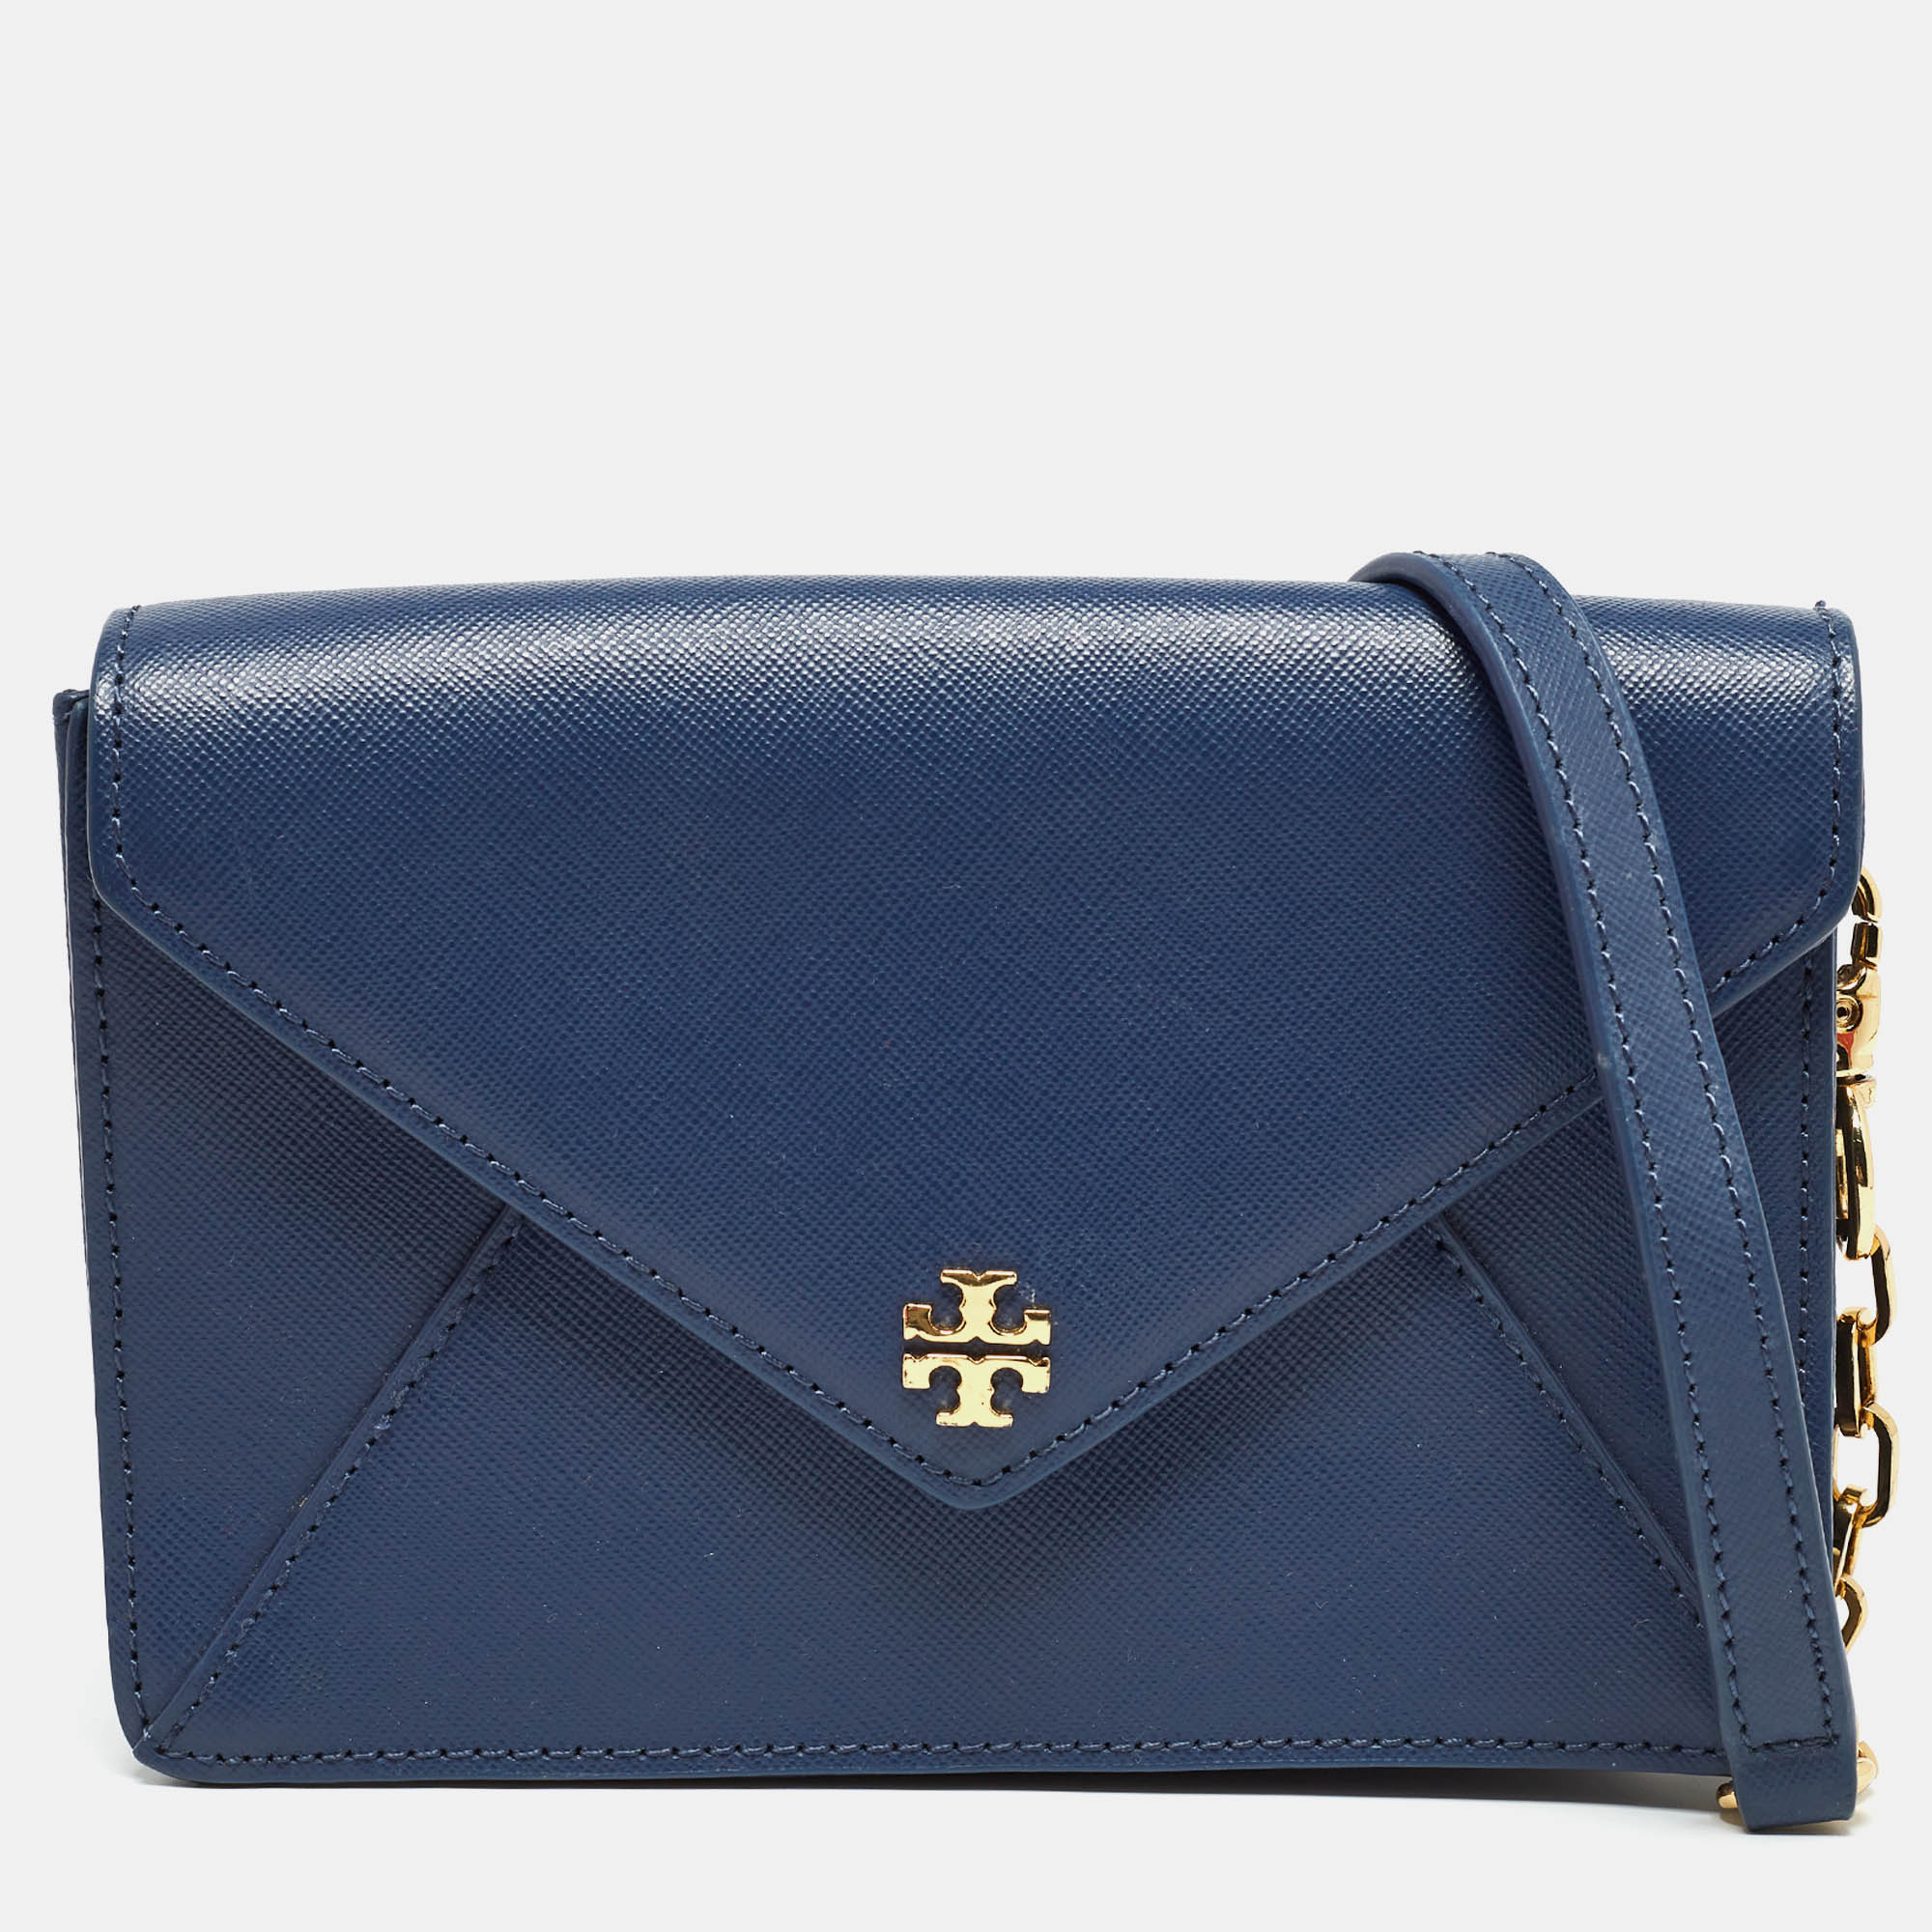 Pre-owned Tory Burch Navy Blue Leather Kira Envelope Flap Chain Clutch